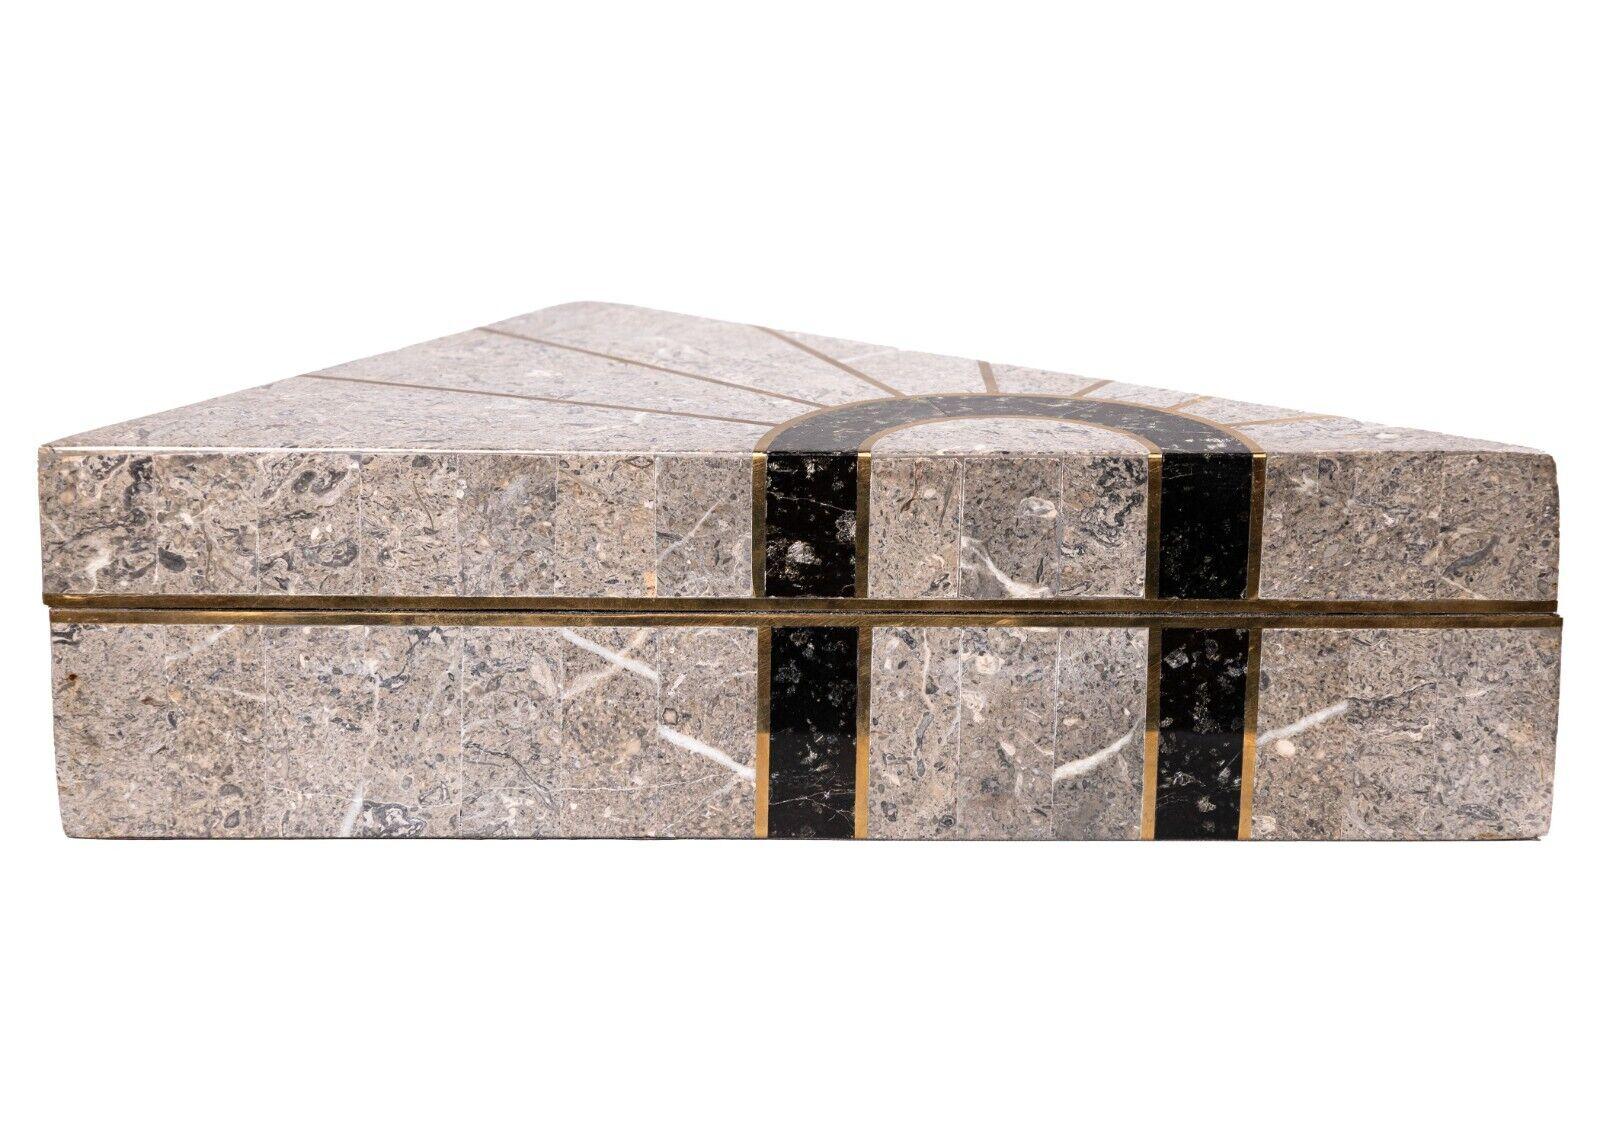 A Maitland Smith tessellated stone triangle box. A gorgeous décor box from designers Maitland Smith. This small box is constructed with a series of beautiful tessellated stone tiles. Mixed in with the tiles, are striped brass details, and a